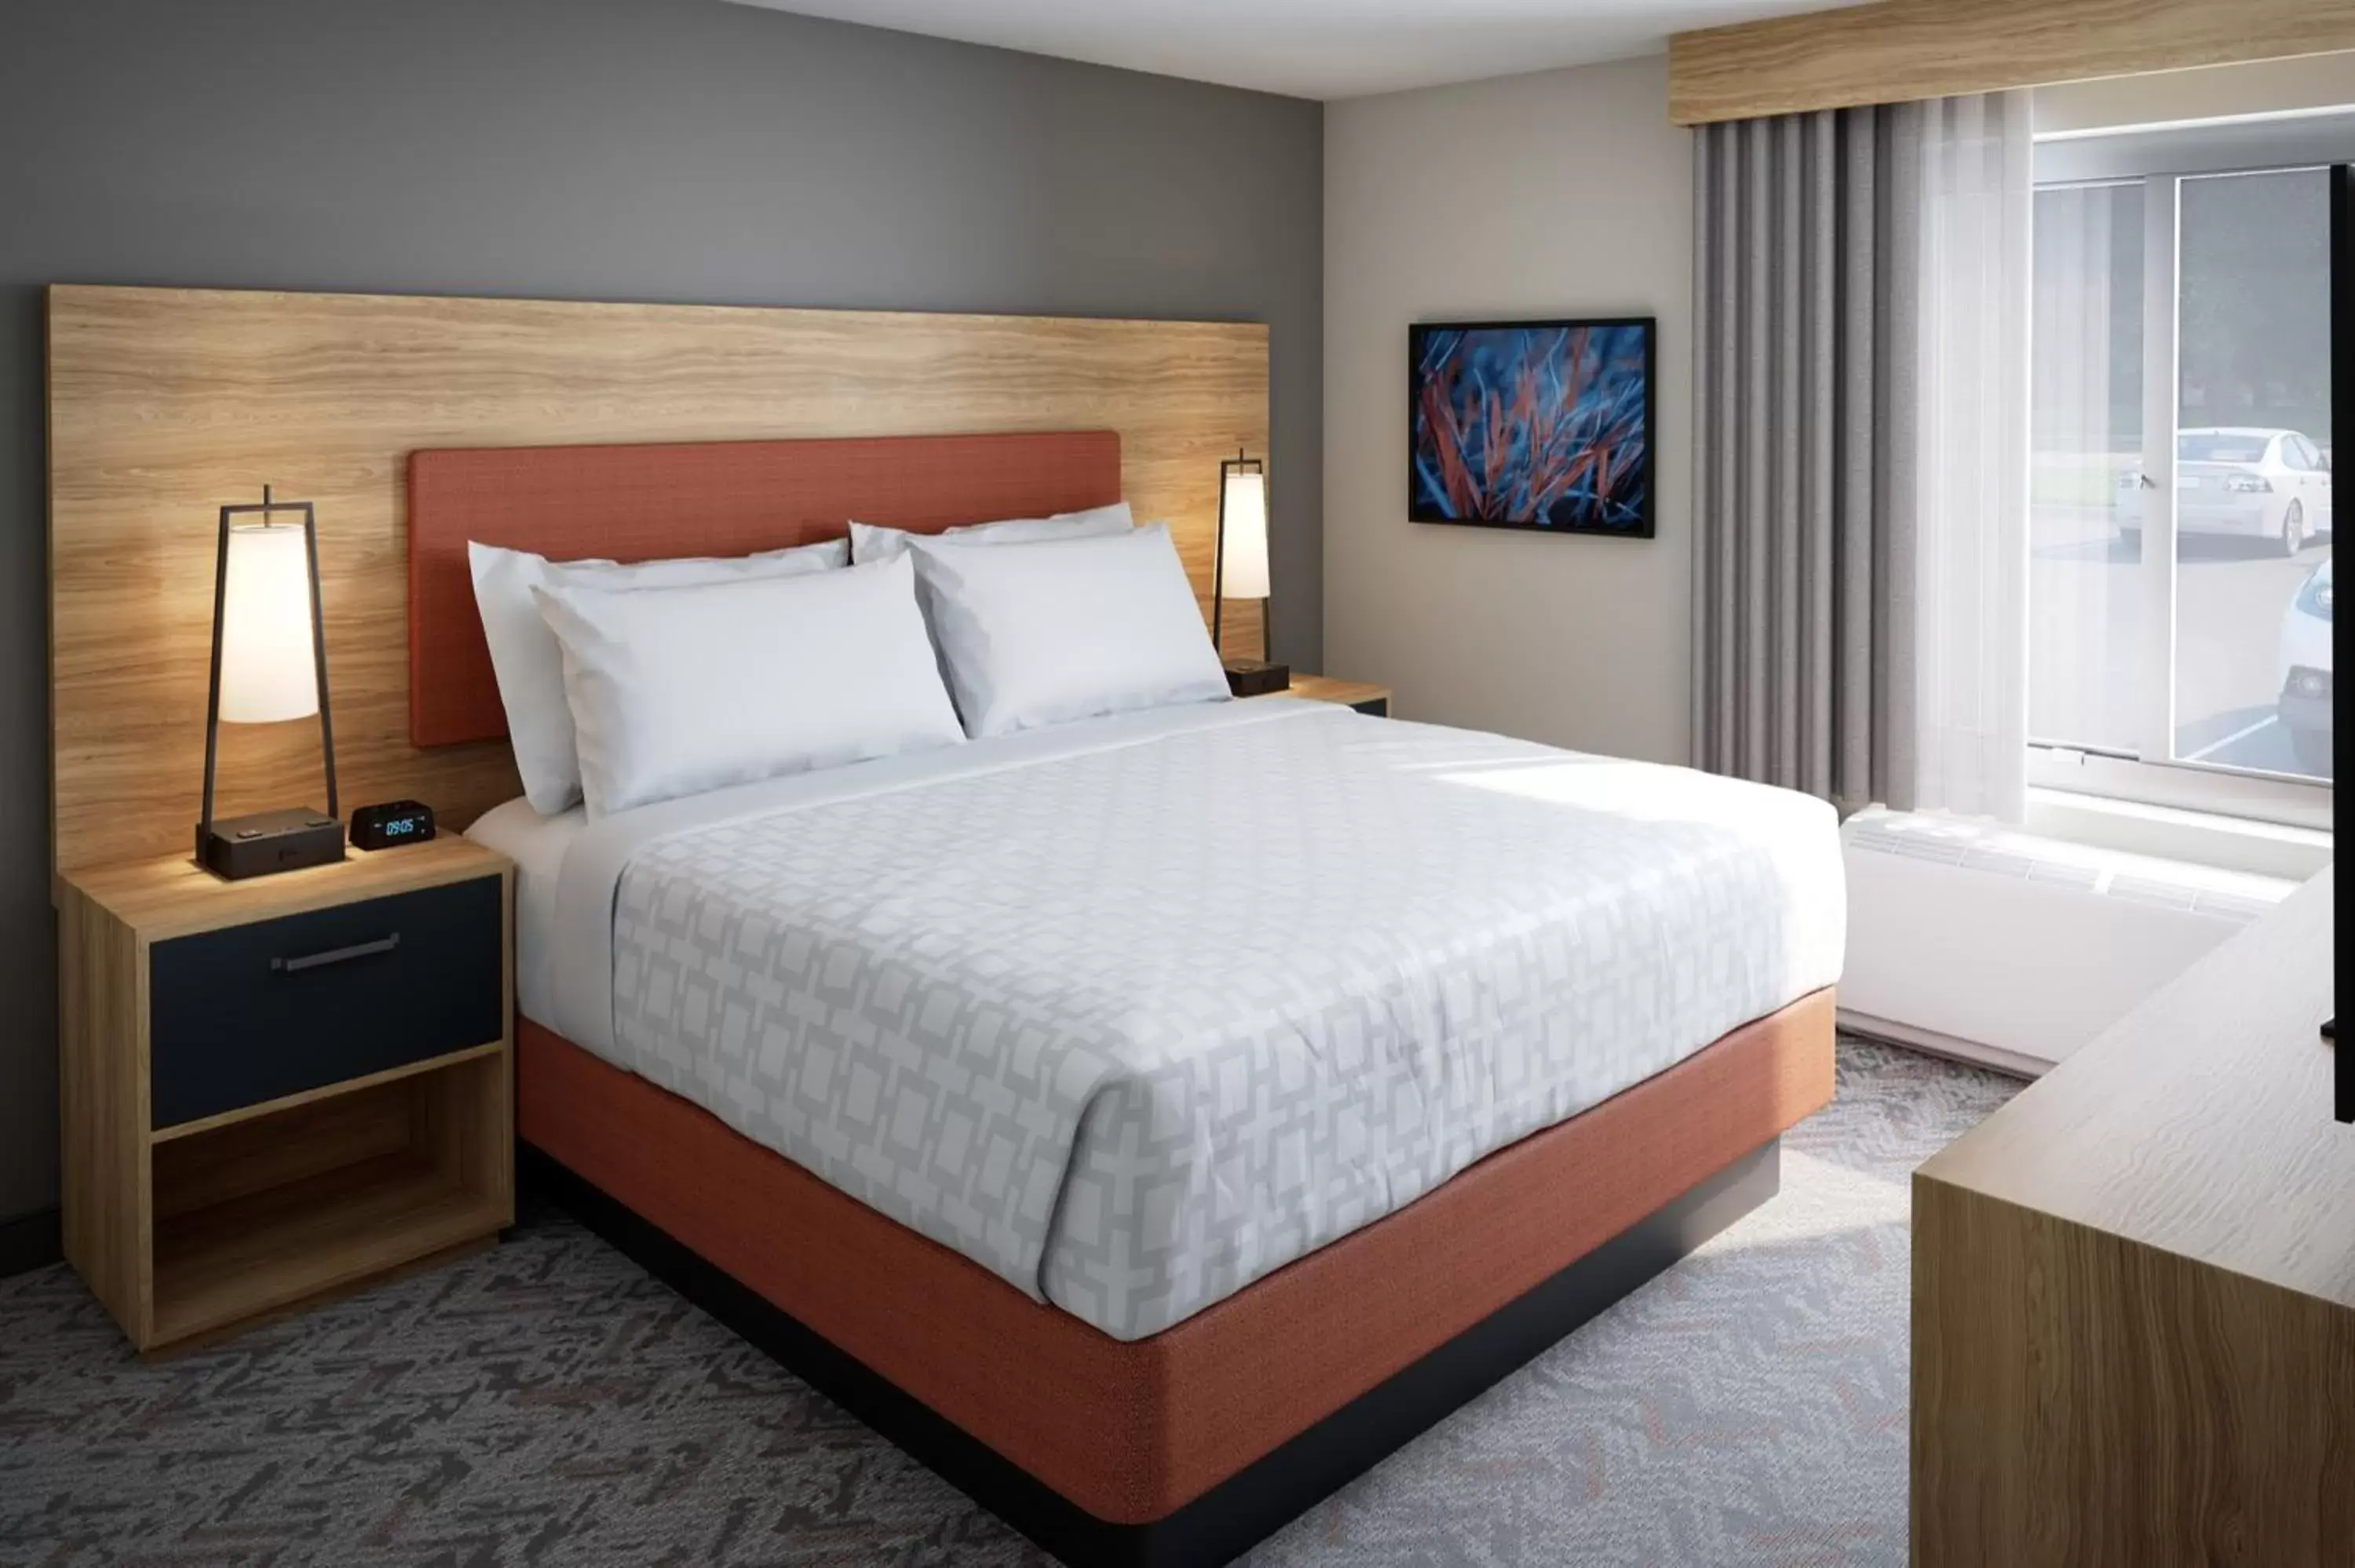 Studio King Suite with Accessible Roll-In Shower - Non-Smoking in Candlewood Suites - San Antonio - Schertz, an IHG Hotel